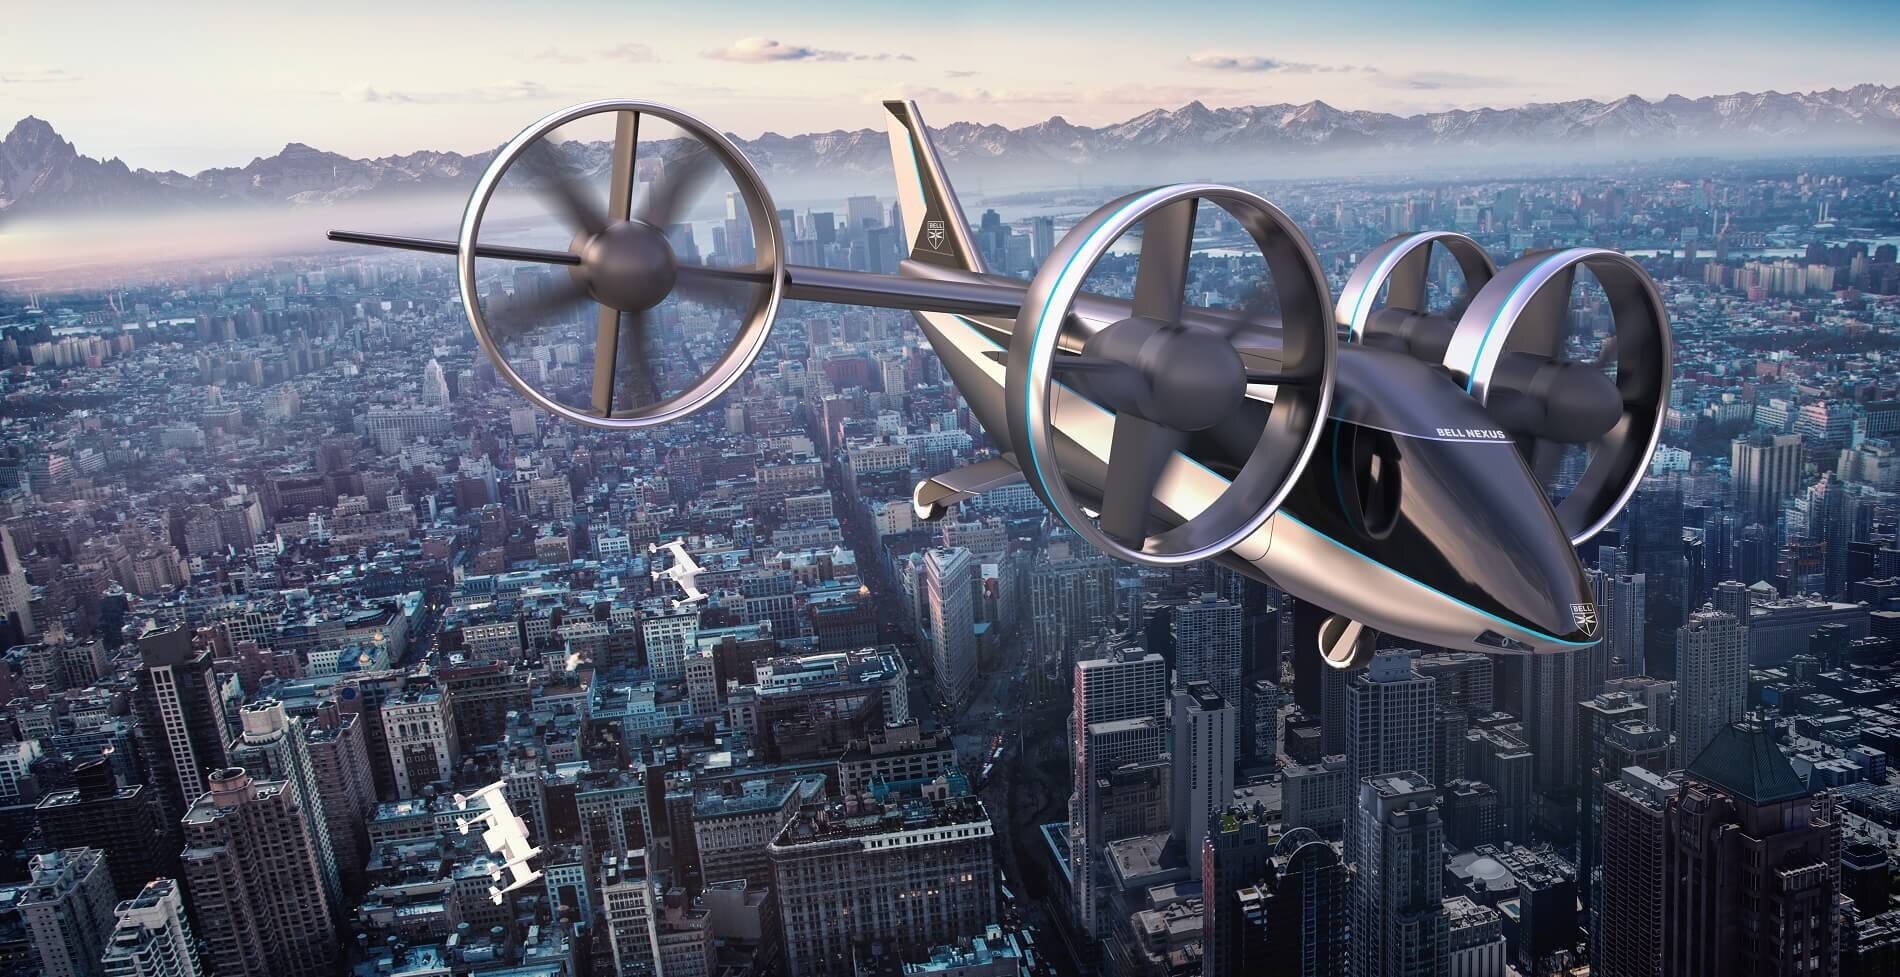 Bell Textron's Nexus hybrid-electric eVTOL air taxi, which is a partner in UAM ridesharing platform, Uber Elevate. Courtesy: Bell Flight